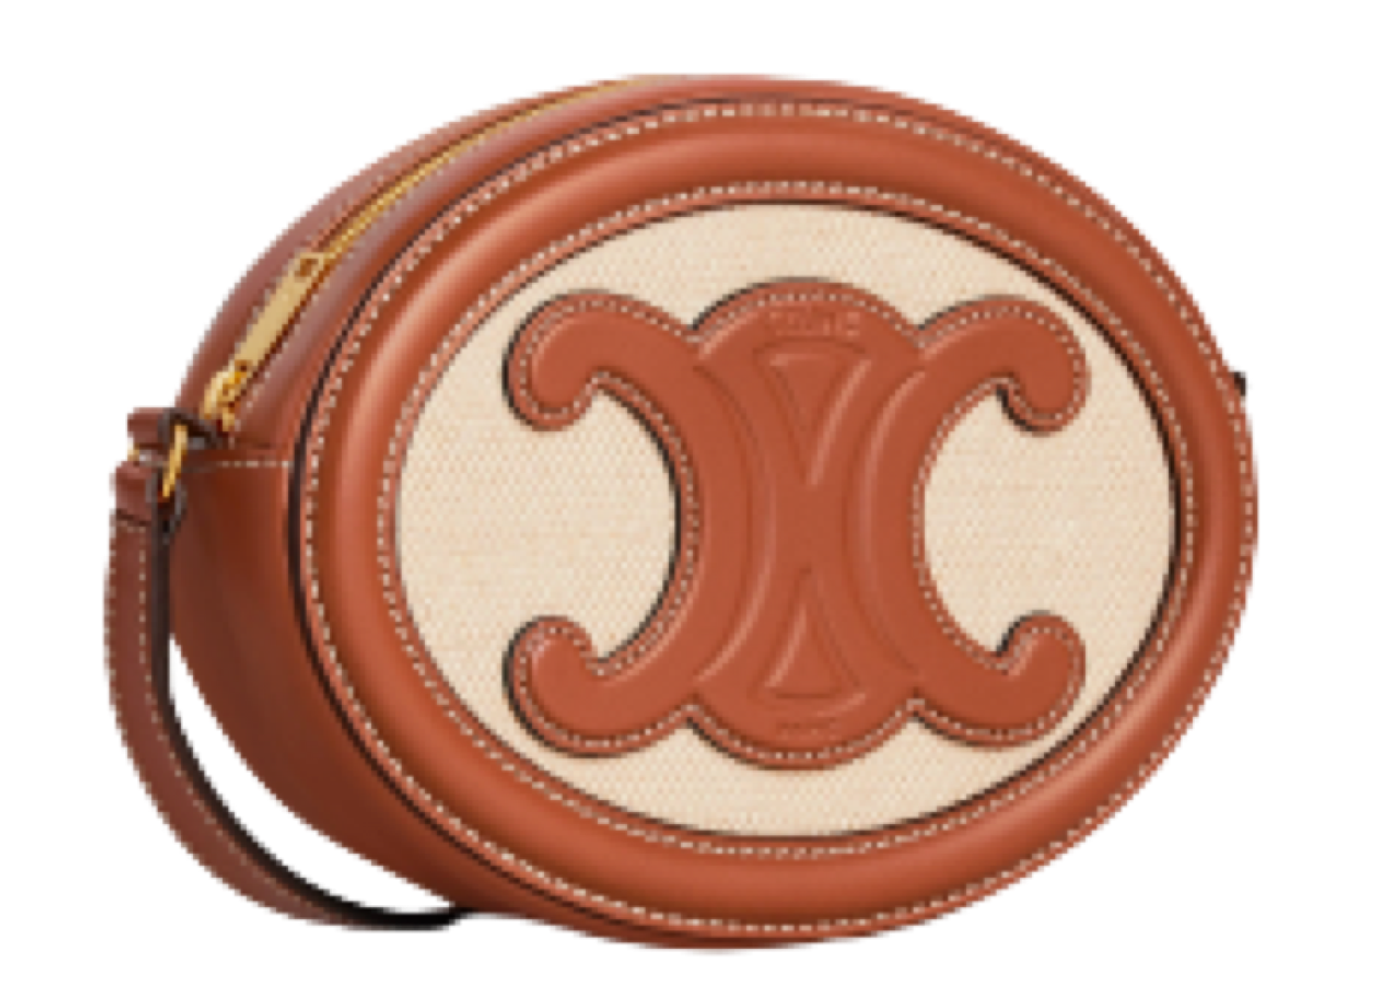 Clutch on Chain Cuir triomphe in textile and calfskin